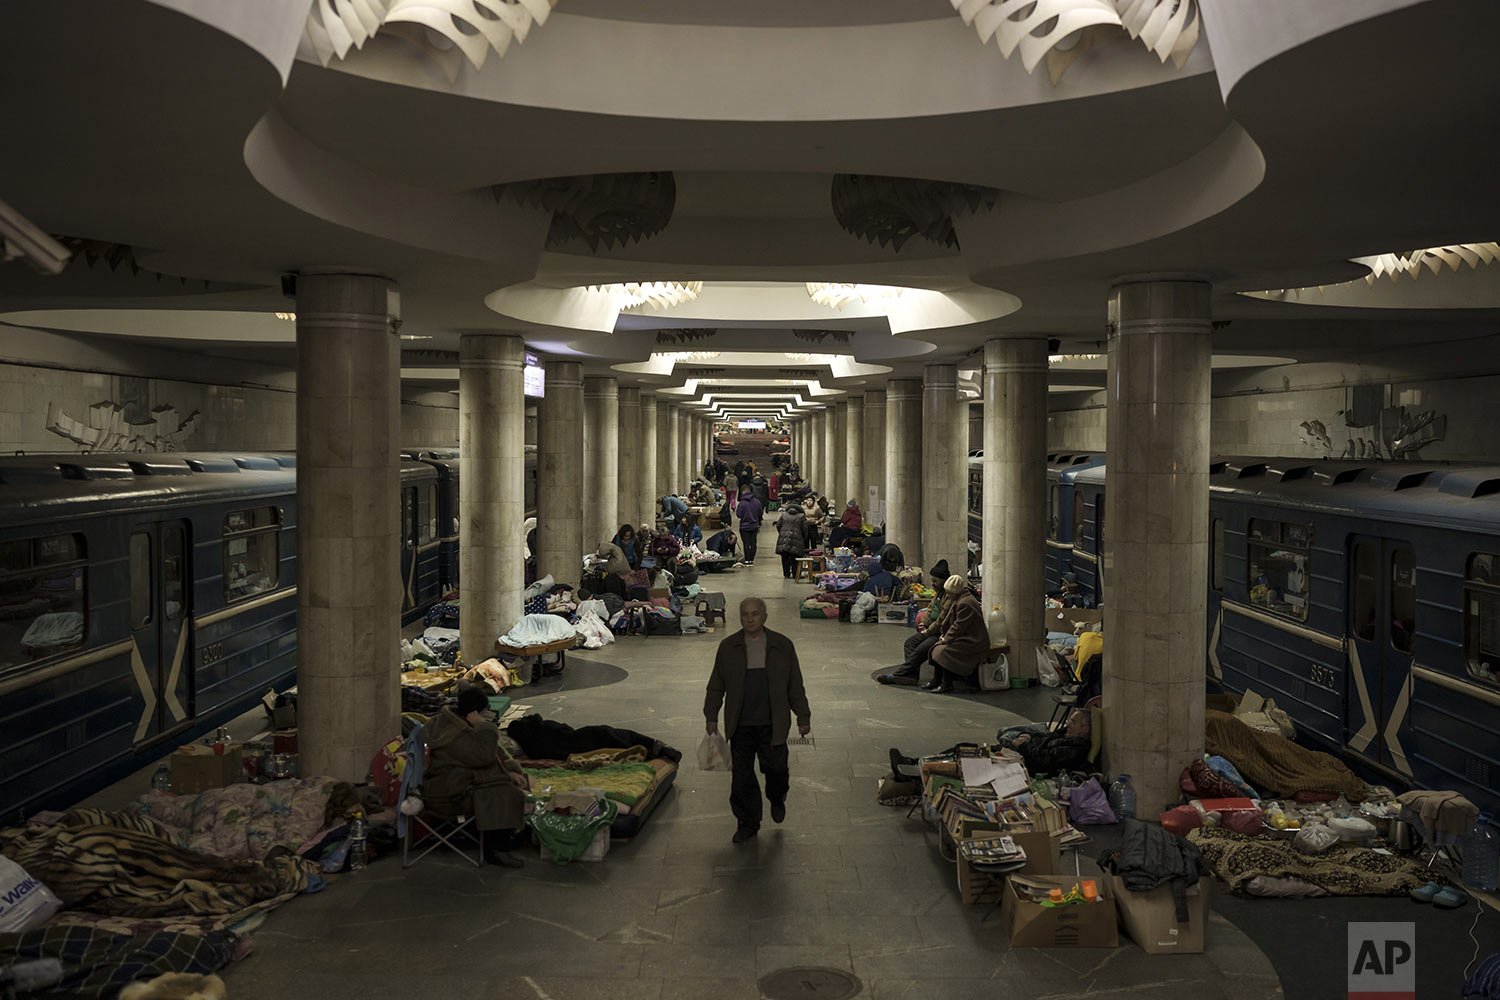  People stay in a metro station being used as a bomb shelter in Kharkiv, Ukraine, Saturday, March 26, 2022. With the invasion now in its second month, Russian forces have seemingly stalled on many fronts and are even losing previously taken ground to